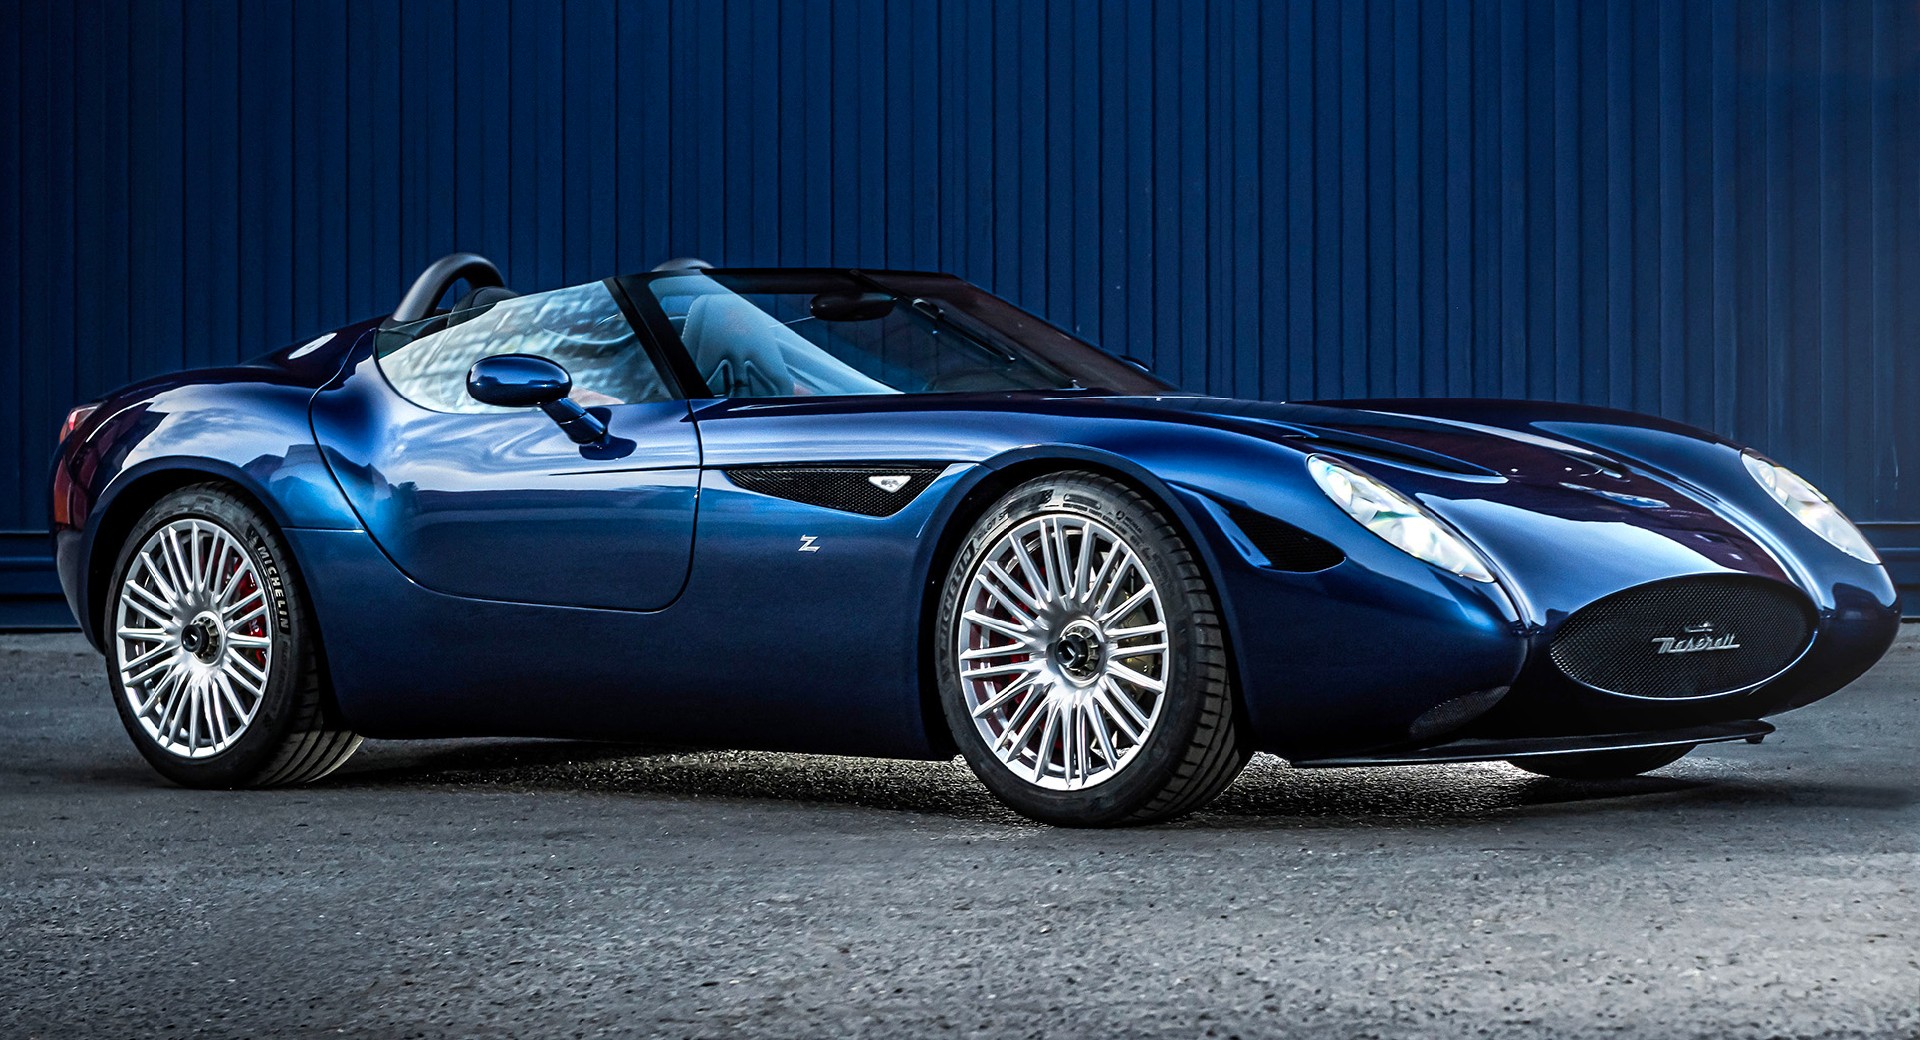 Mostro Barchetta, which works with Zagato's Maserati, debuted seven years after the coupe